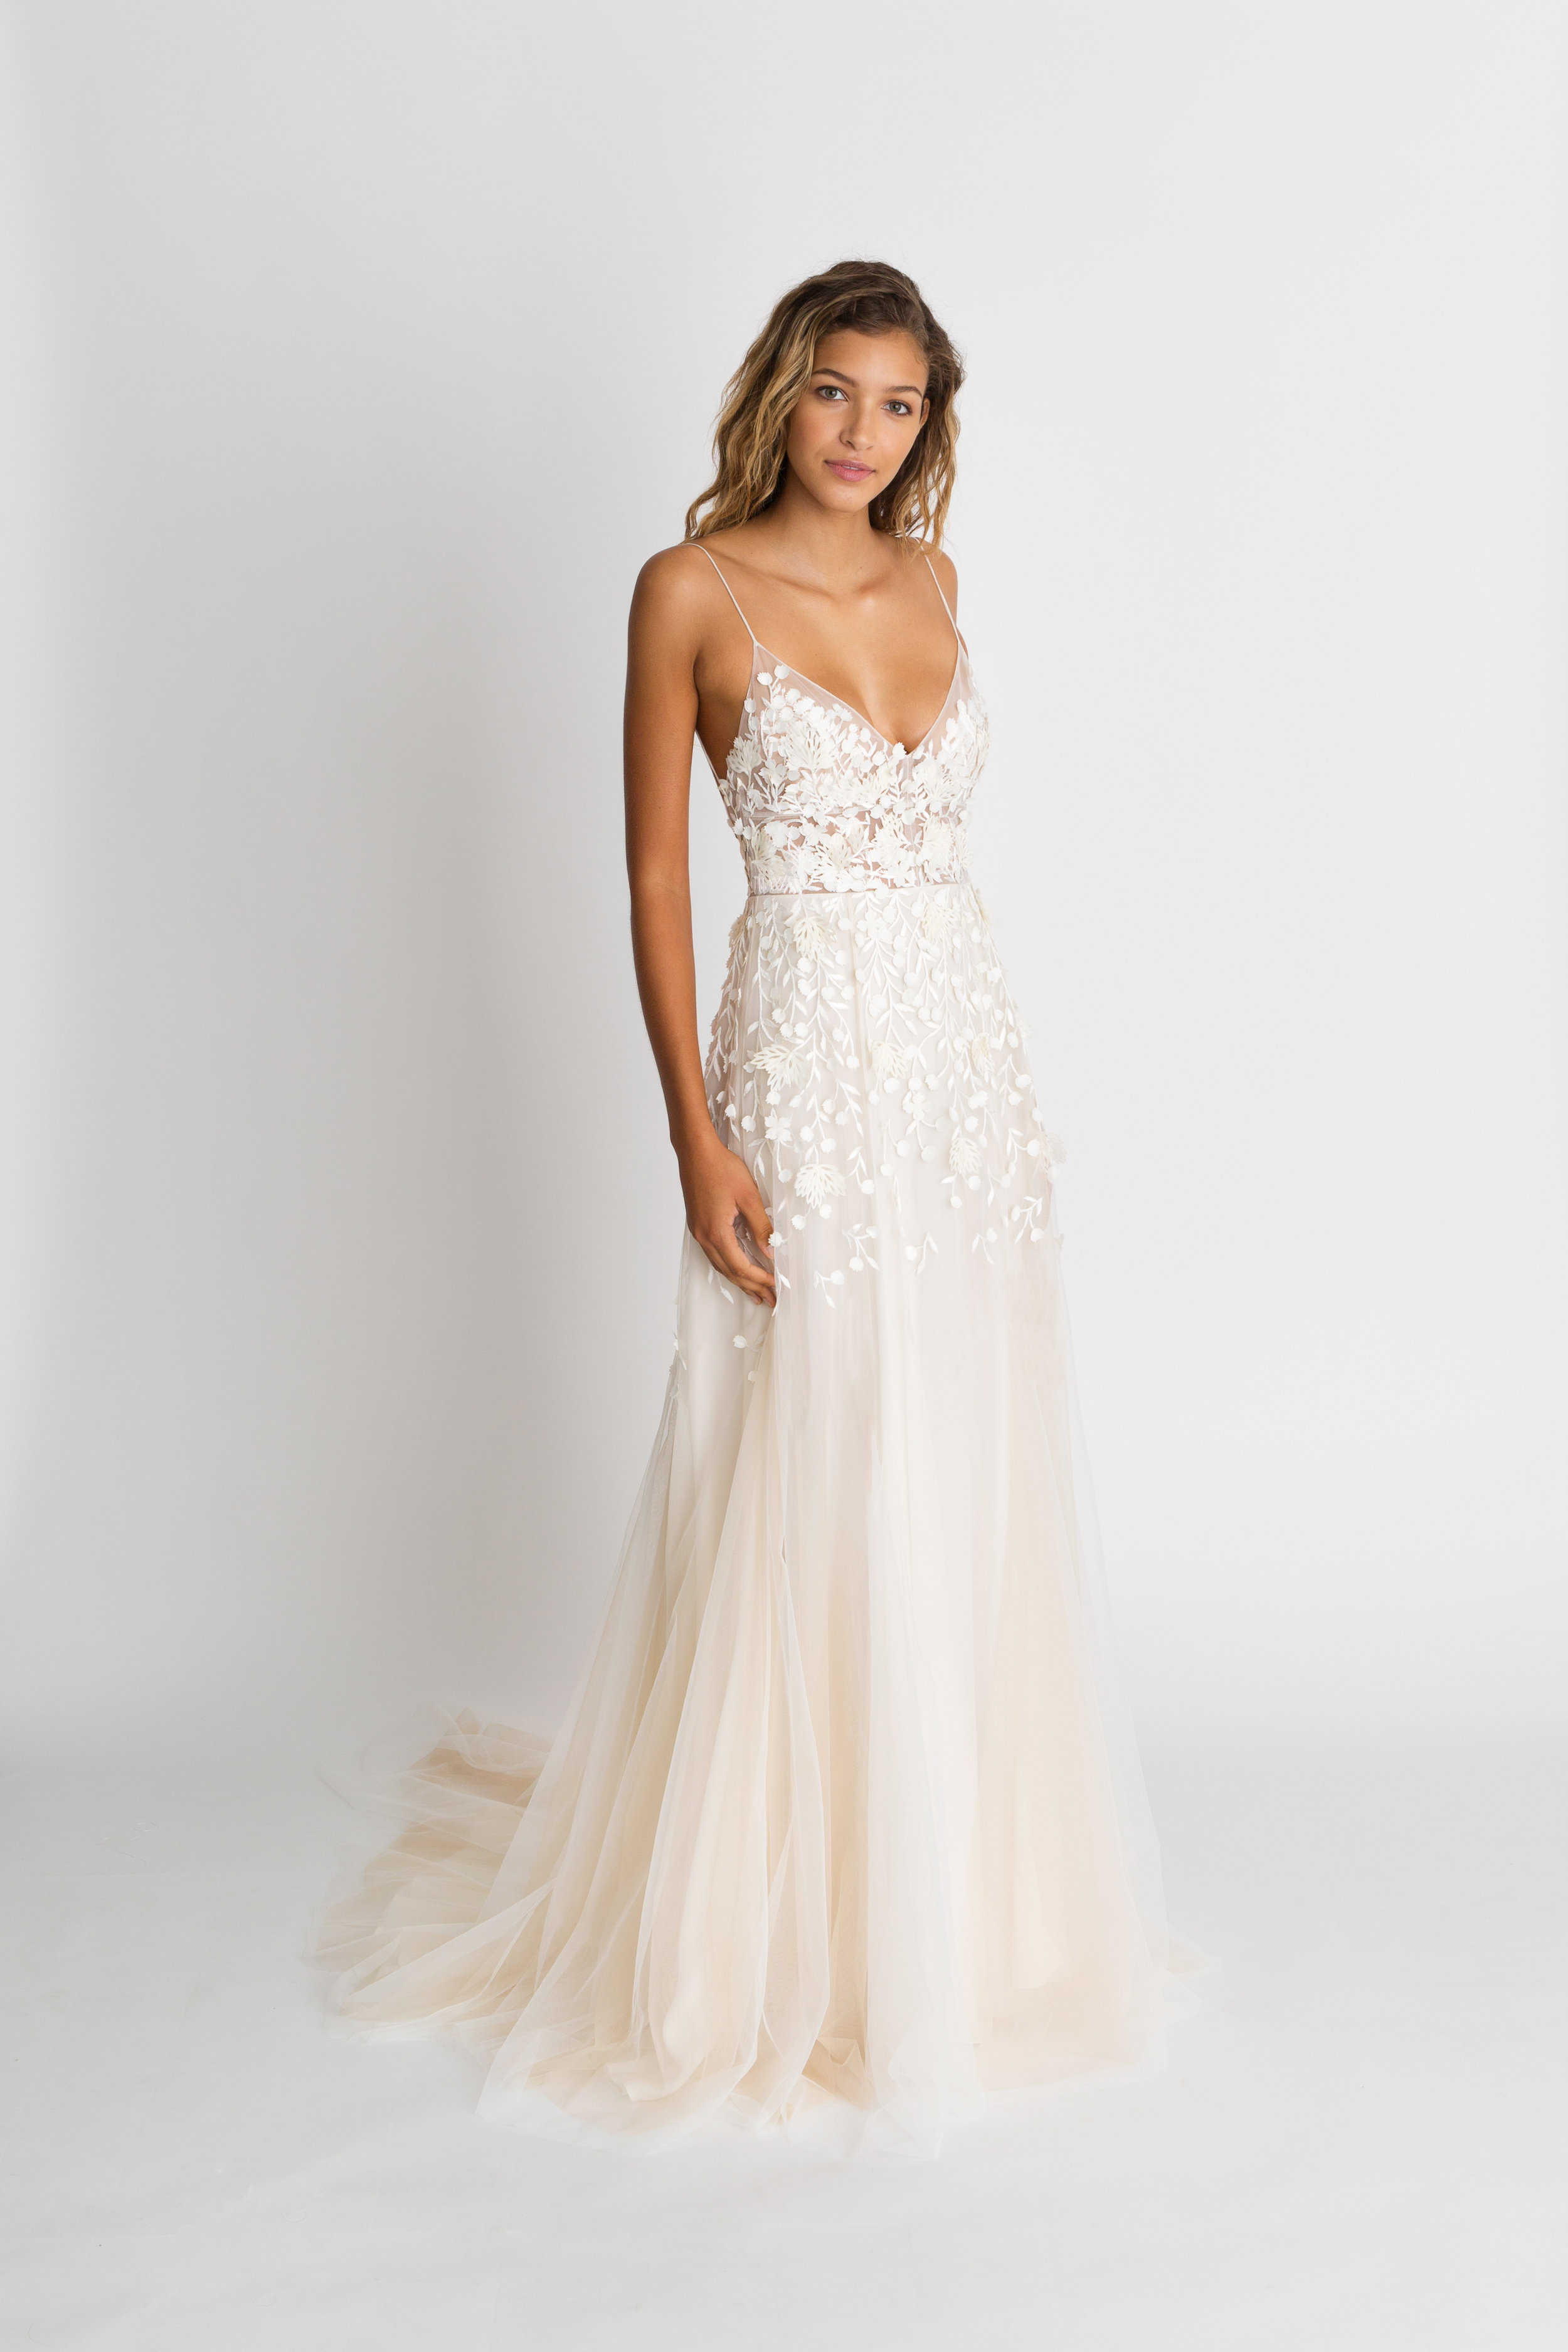 Wedding Dresses  Bridal Gowns Your Dream Wedding Gown Awaits